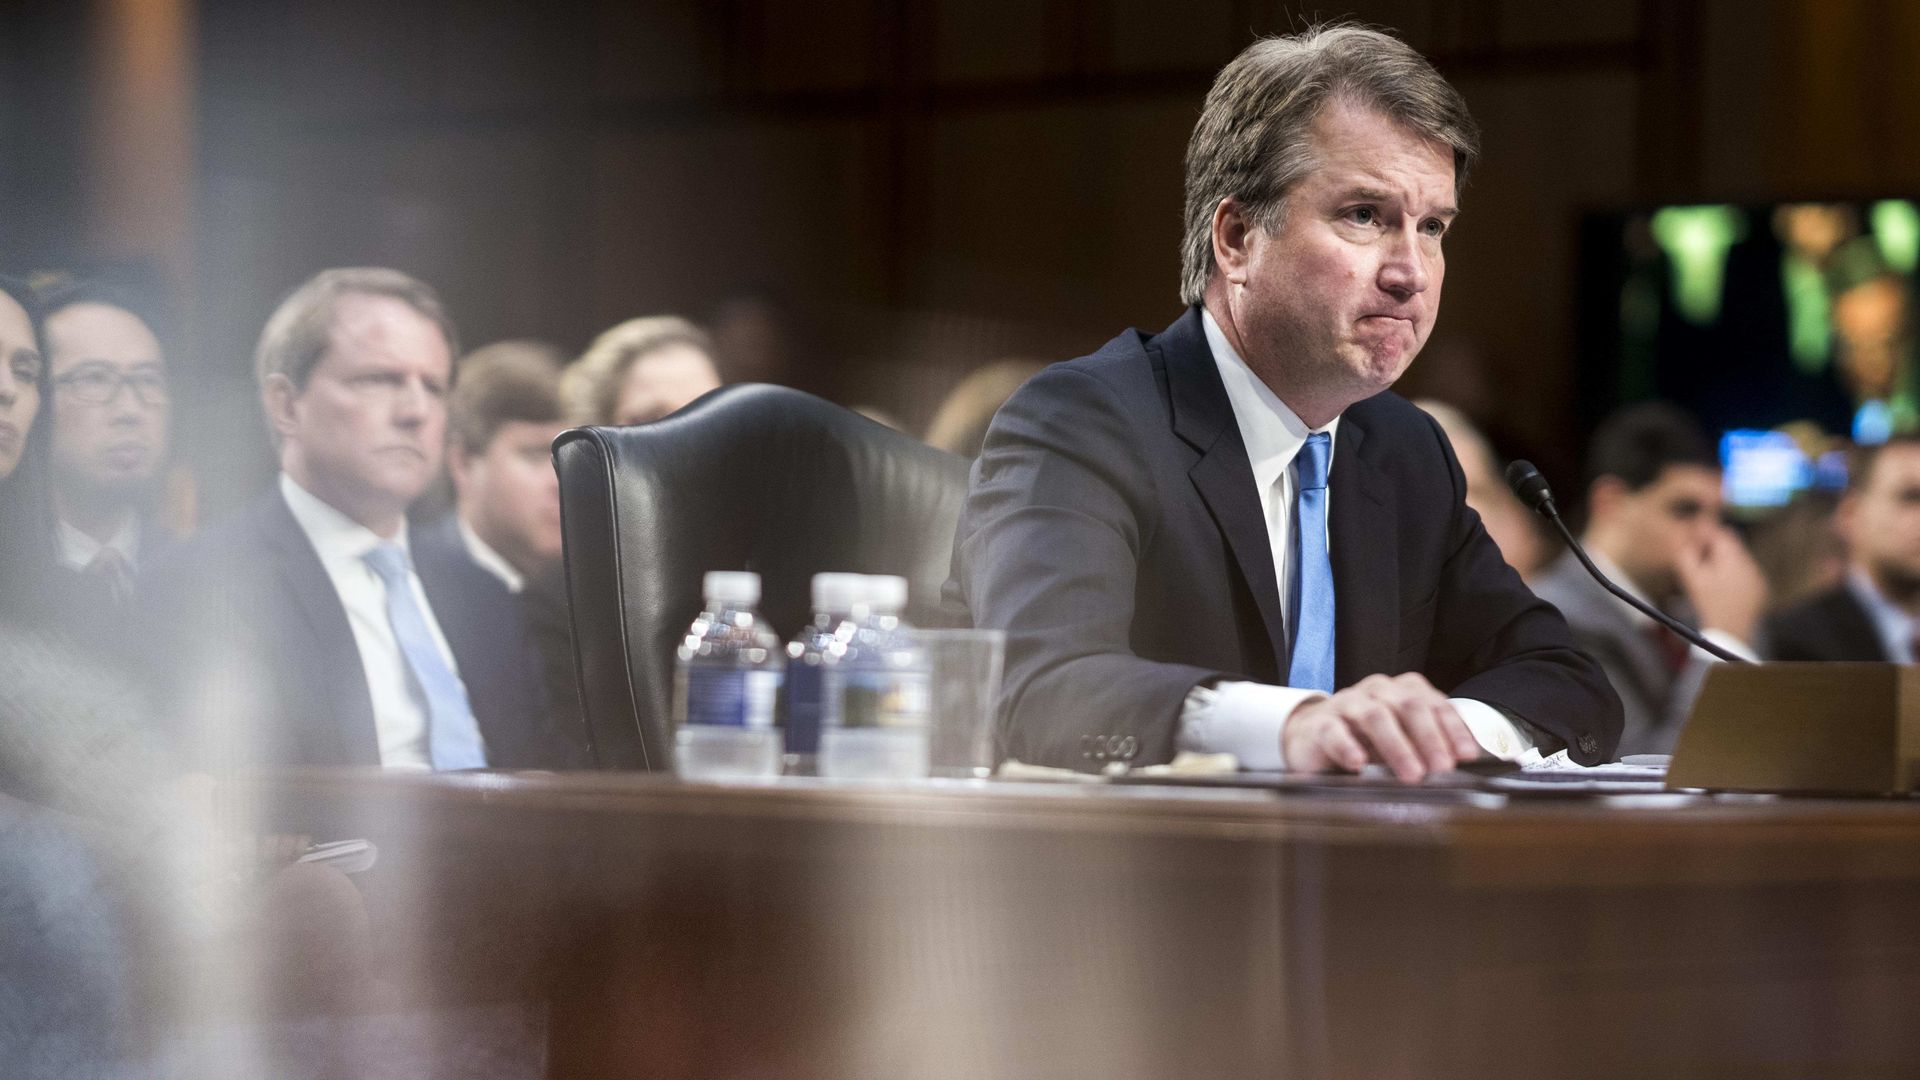 Supreme Court nominee Brett Kavanaugh during his confirmation hearing 